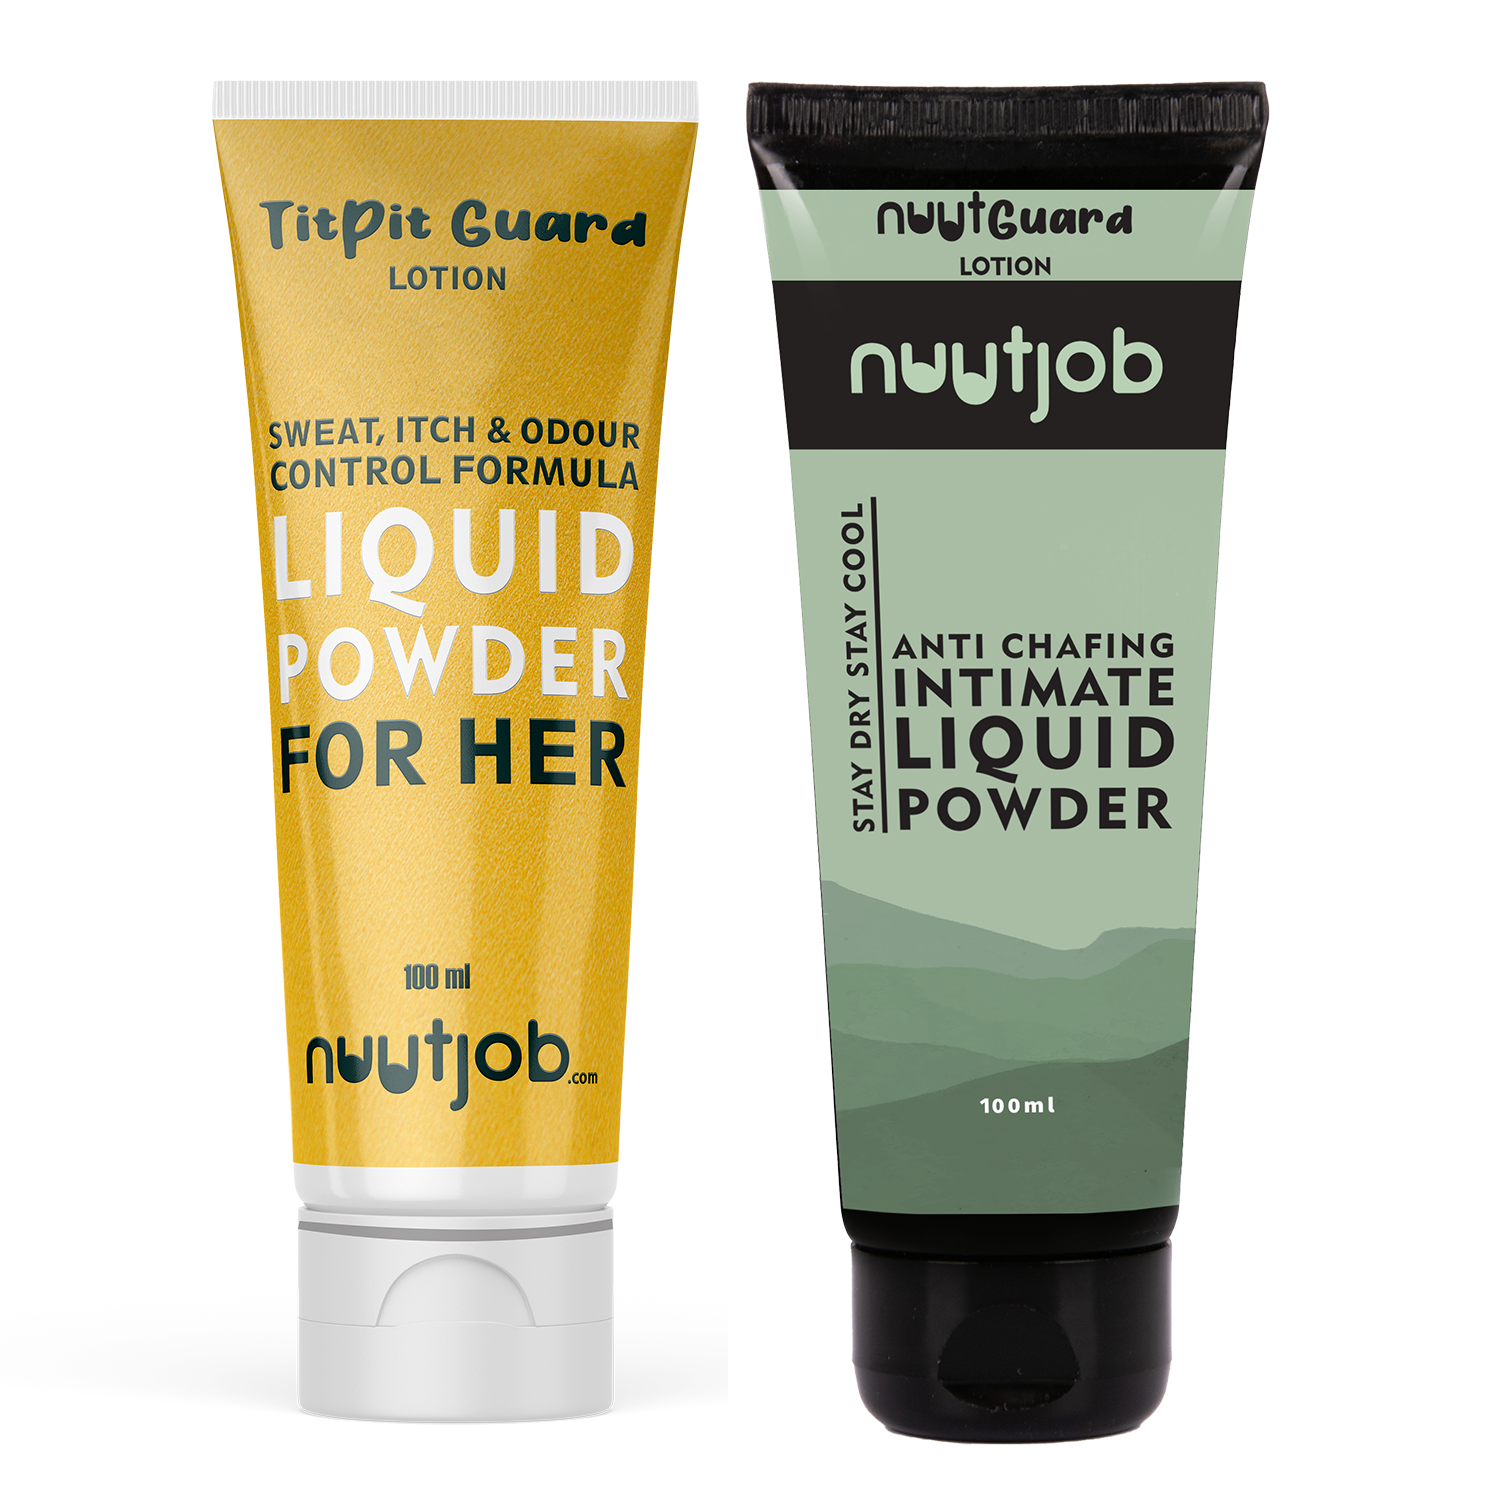 Him and Her Testicle And Breasticle 200ml Combo Nuutguard + Titpit Guard